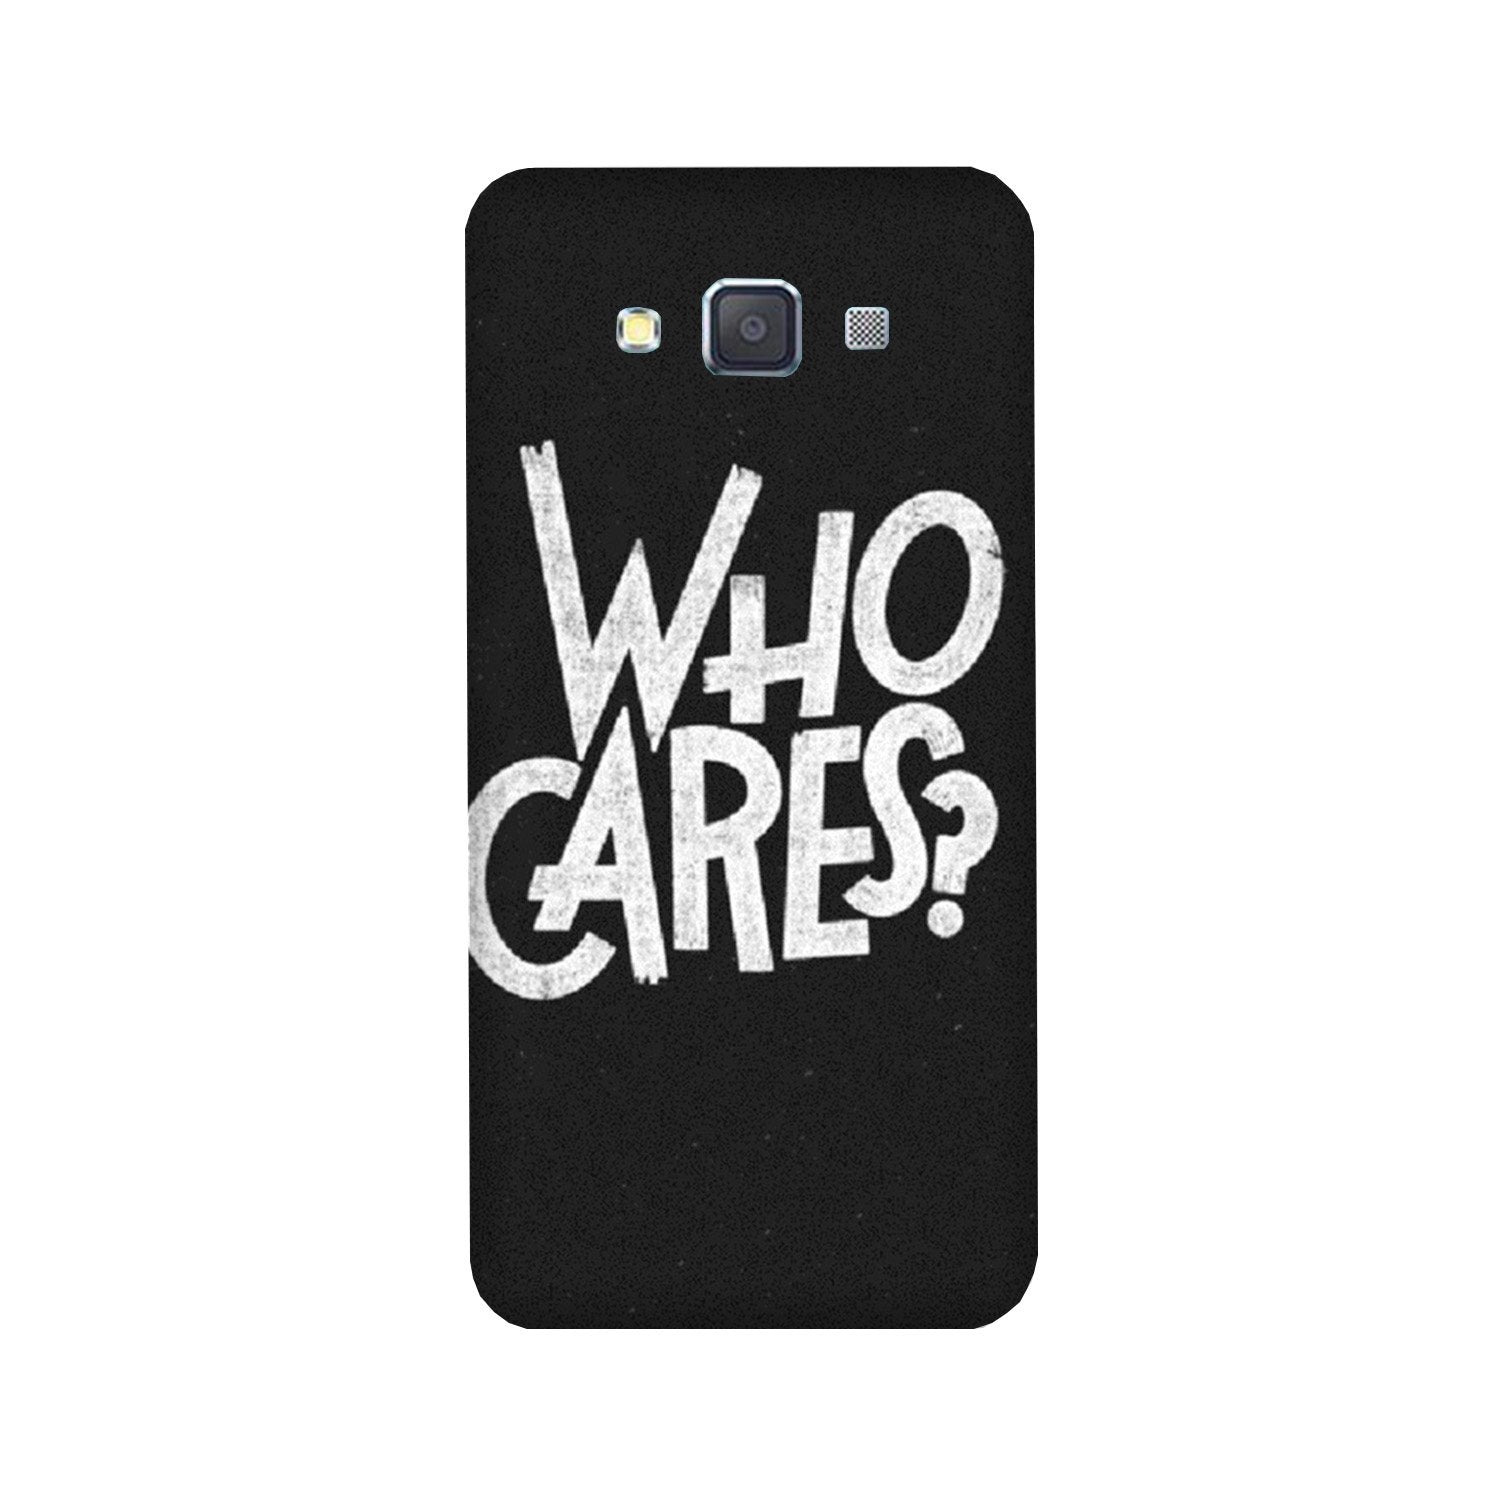 Who Cares Case for Galaxy Grand 2